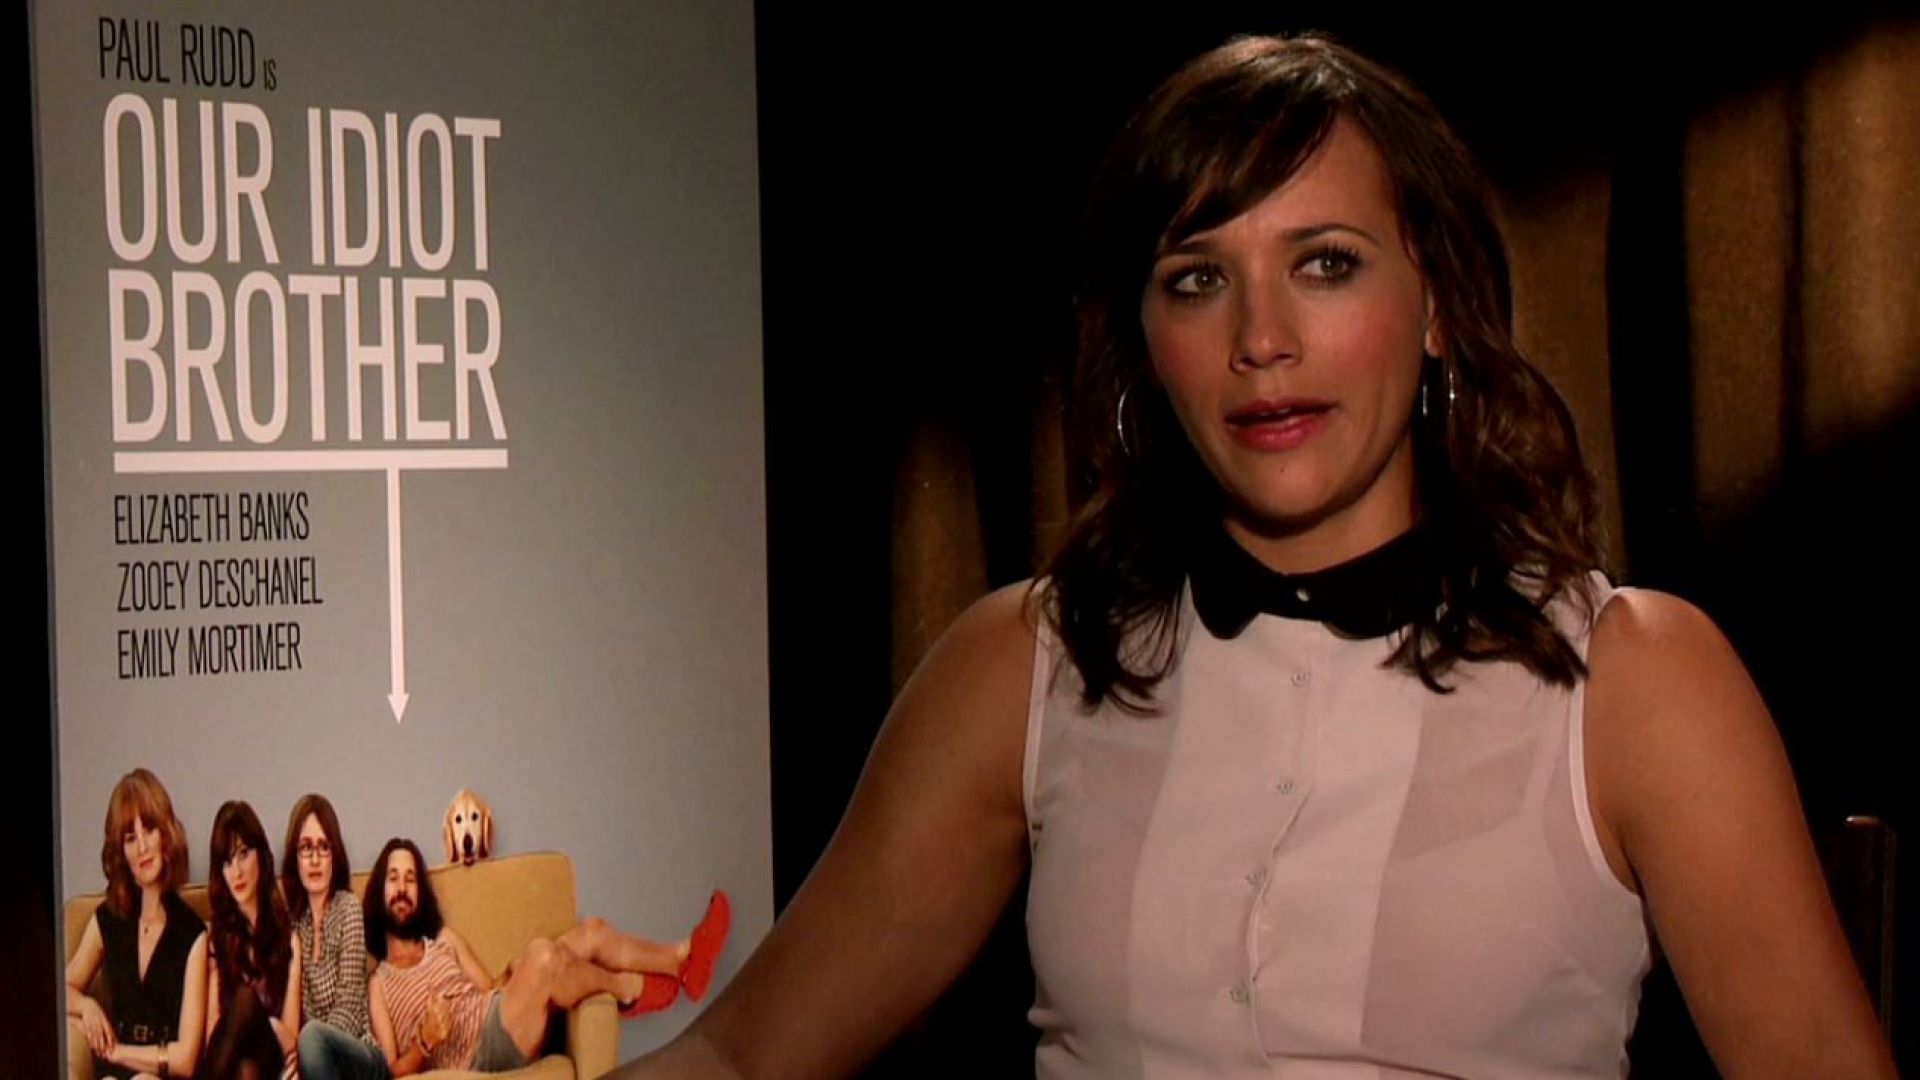 Rashida Jones talks about painful family memories for Our Idiot Brother